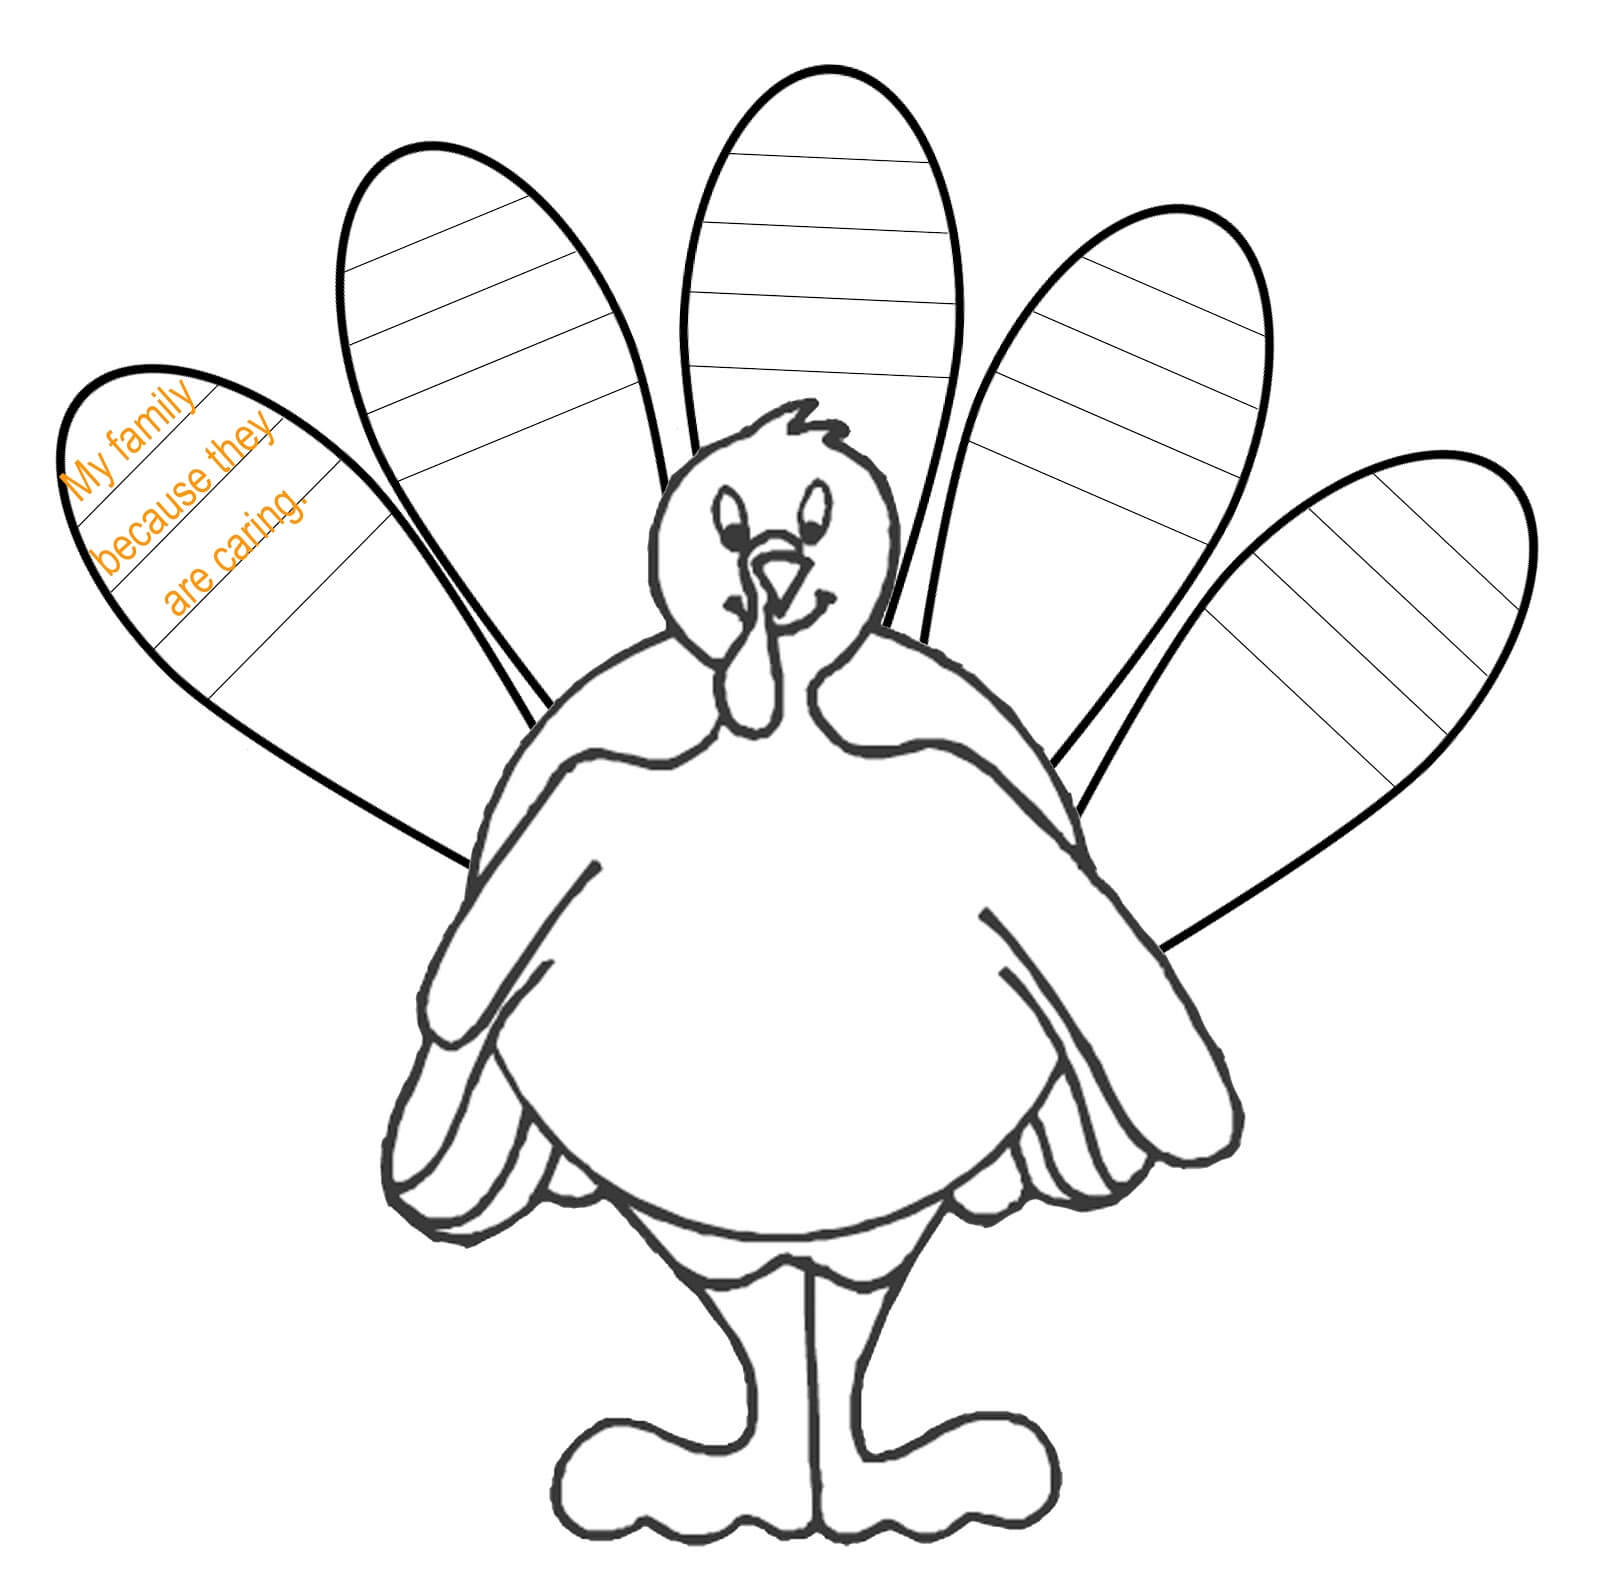 Turkey Clip Art Coloring Page, Picture #4554 Turkey Clip Art Throughout Blank Turkey Template